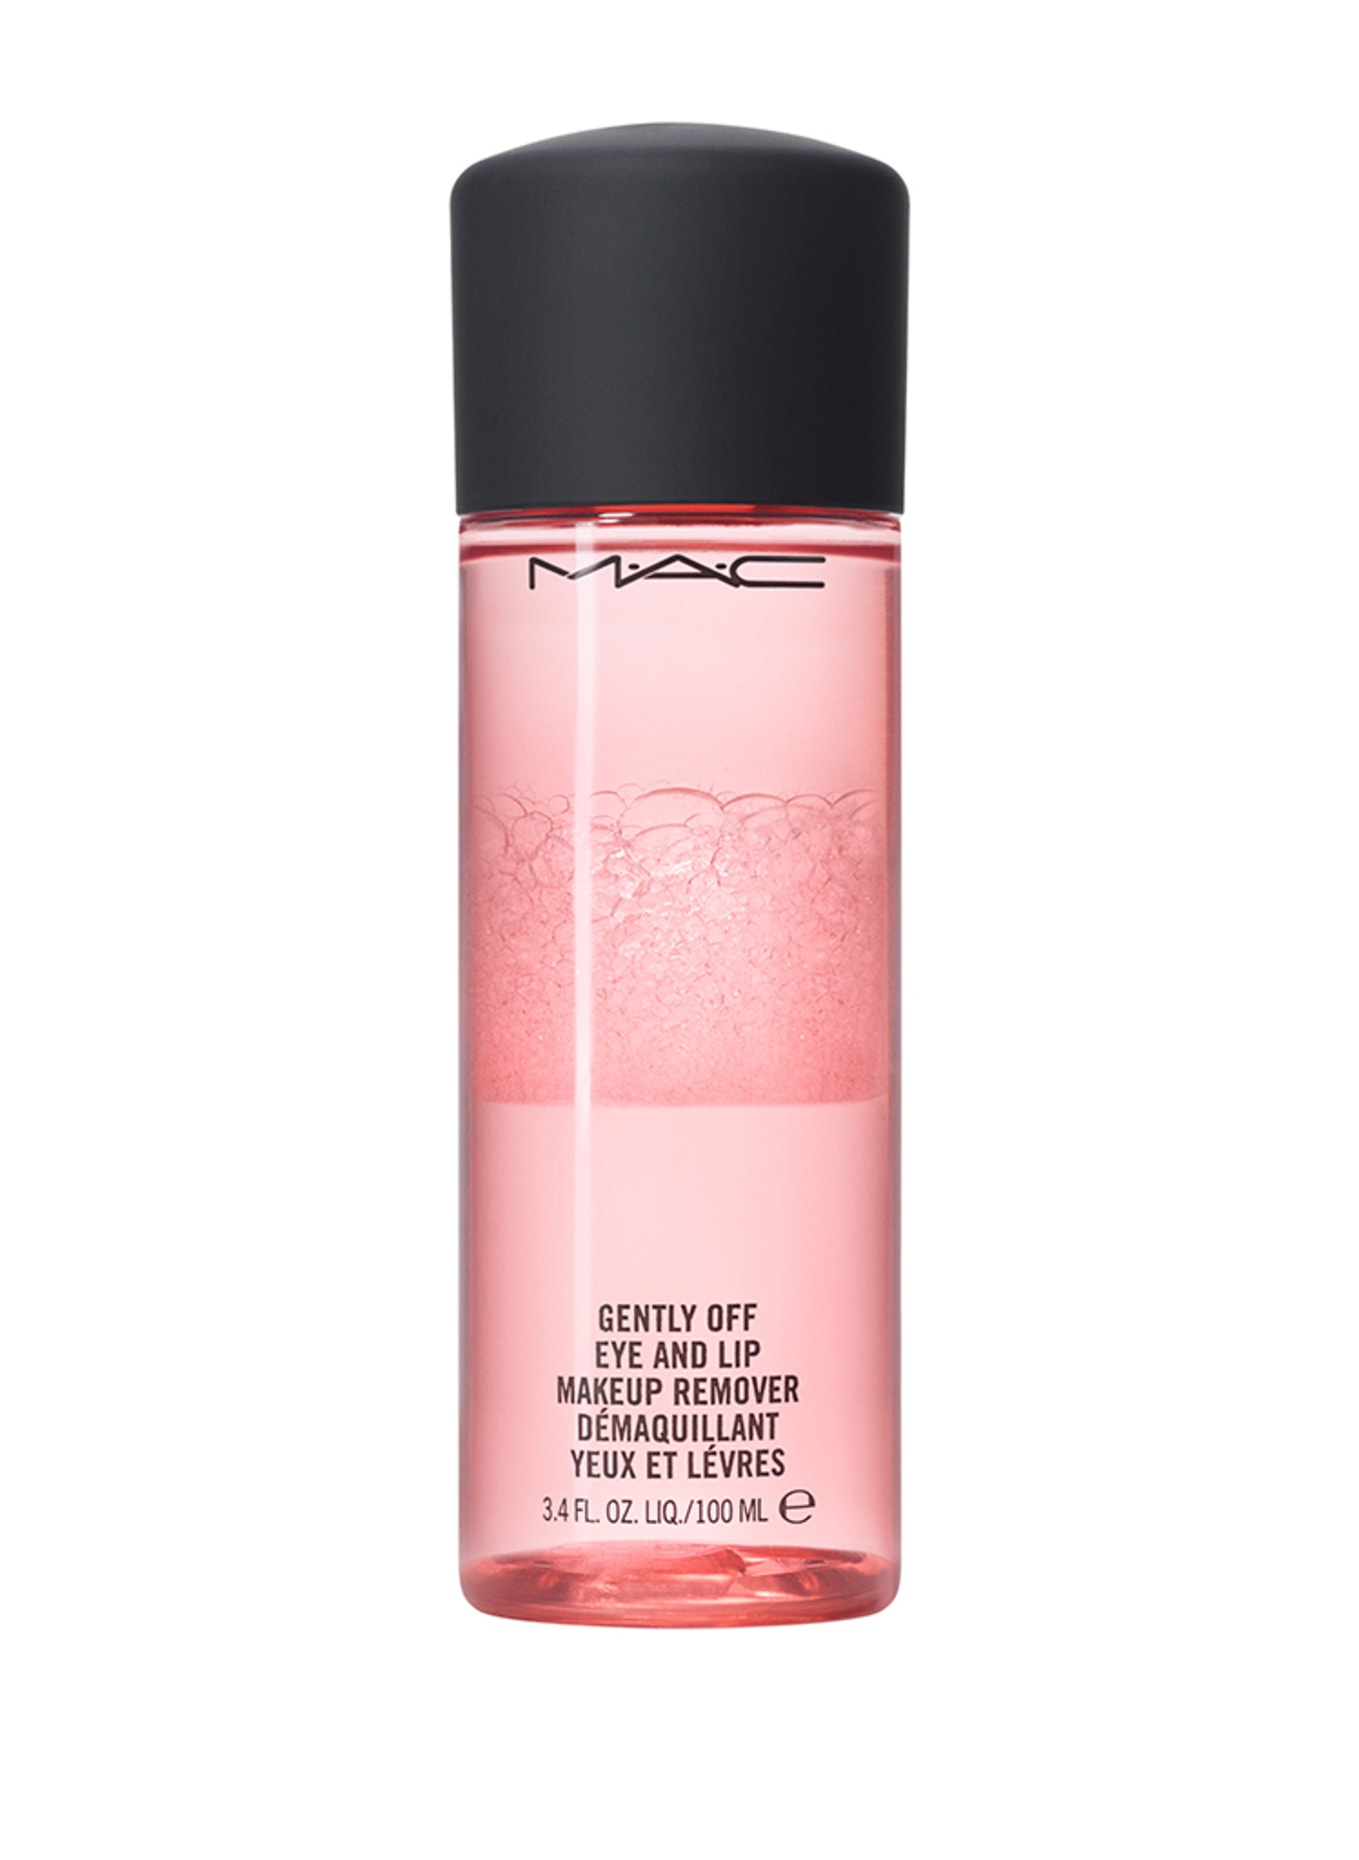 M.A.C GENTLY OFF EYE AND LIP MAKEUP REMOVER  (Bild 1)